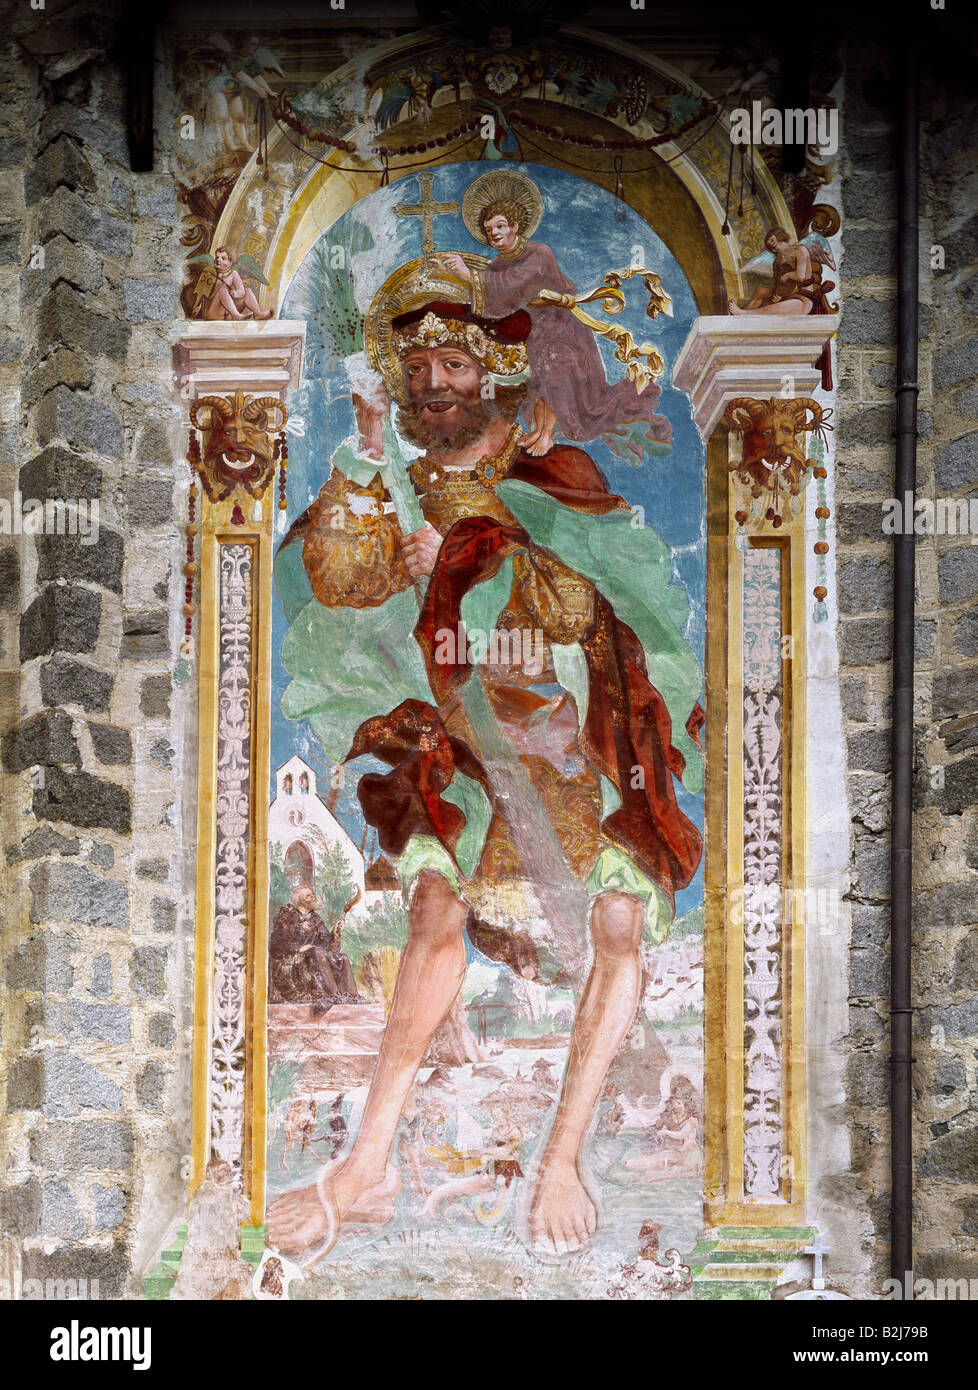 Saint Christopher, martyr, "St. Christopher carrying the Christ Child", full length, mural painting, height circa 800 cm, St. Sigmund, local church, South Tyrol, 1519, Stock Photo